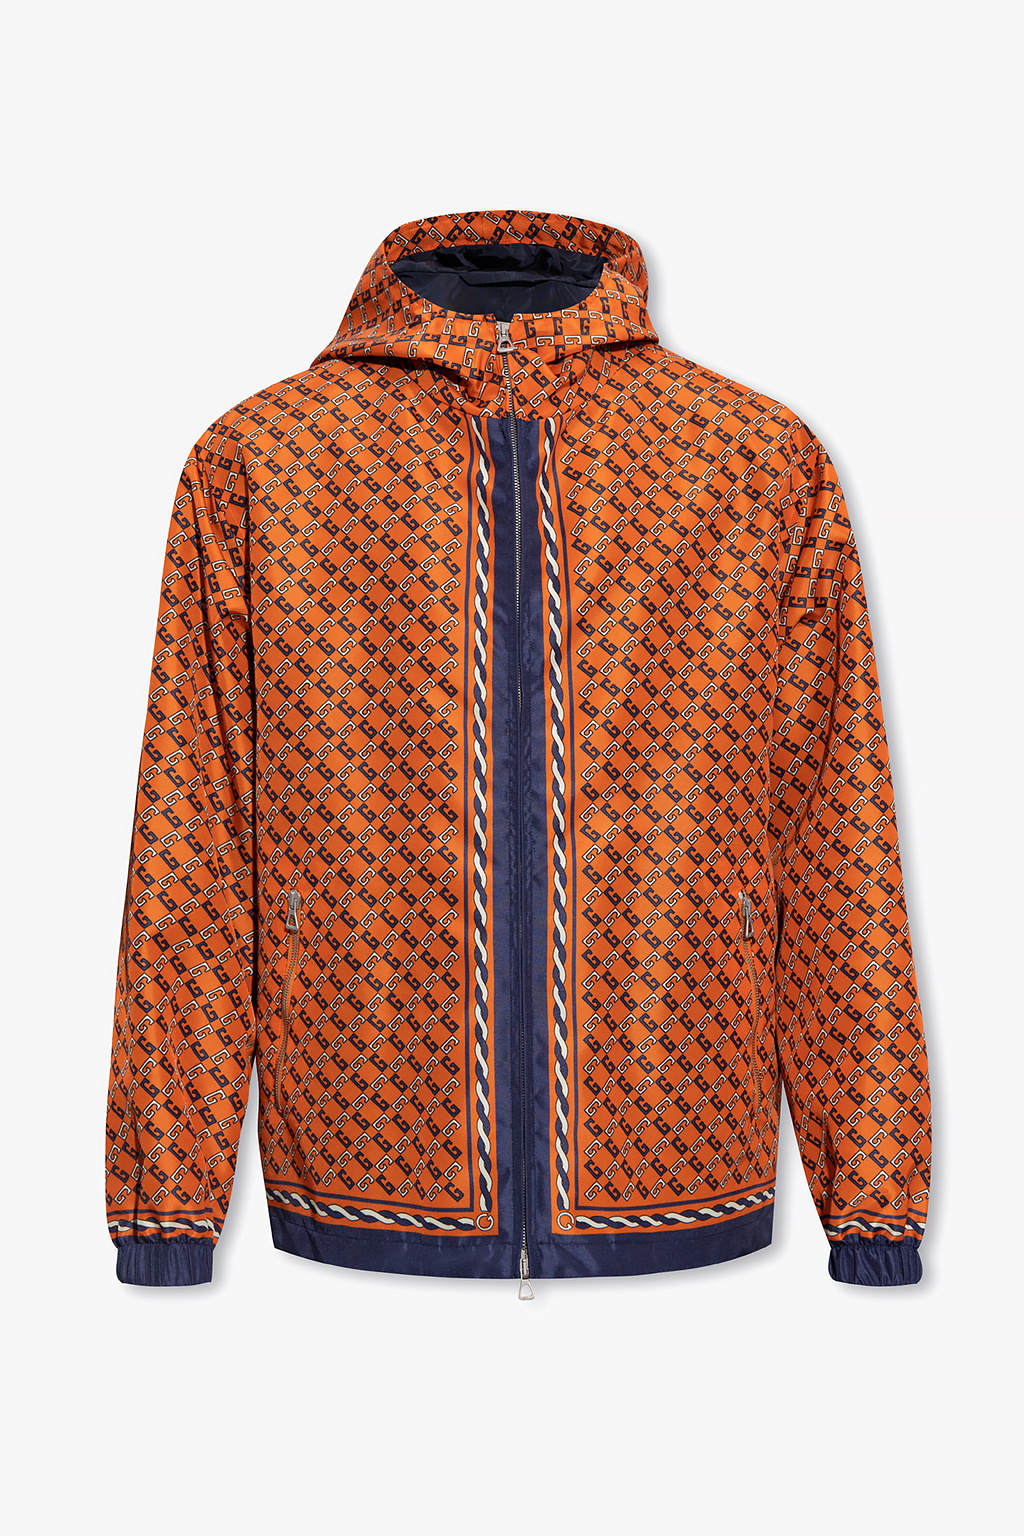 gucci has Patterned hooded jacket